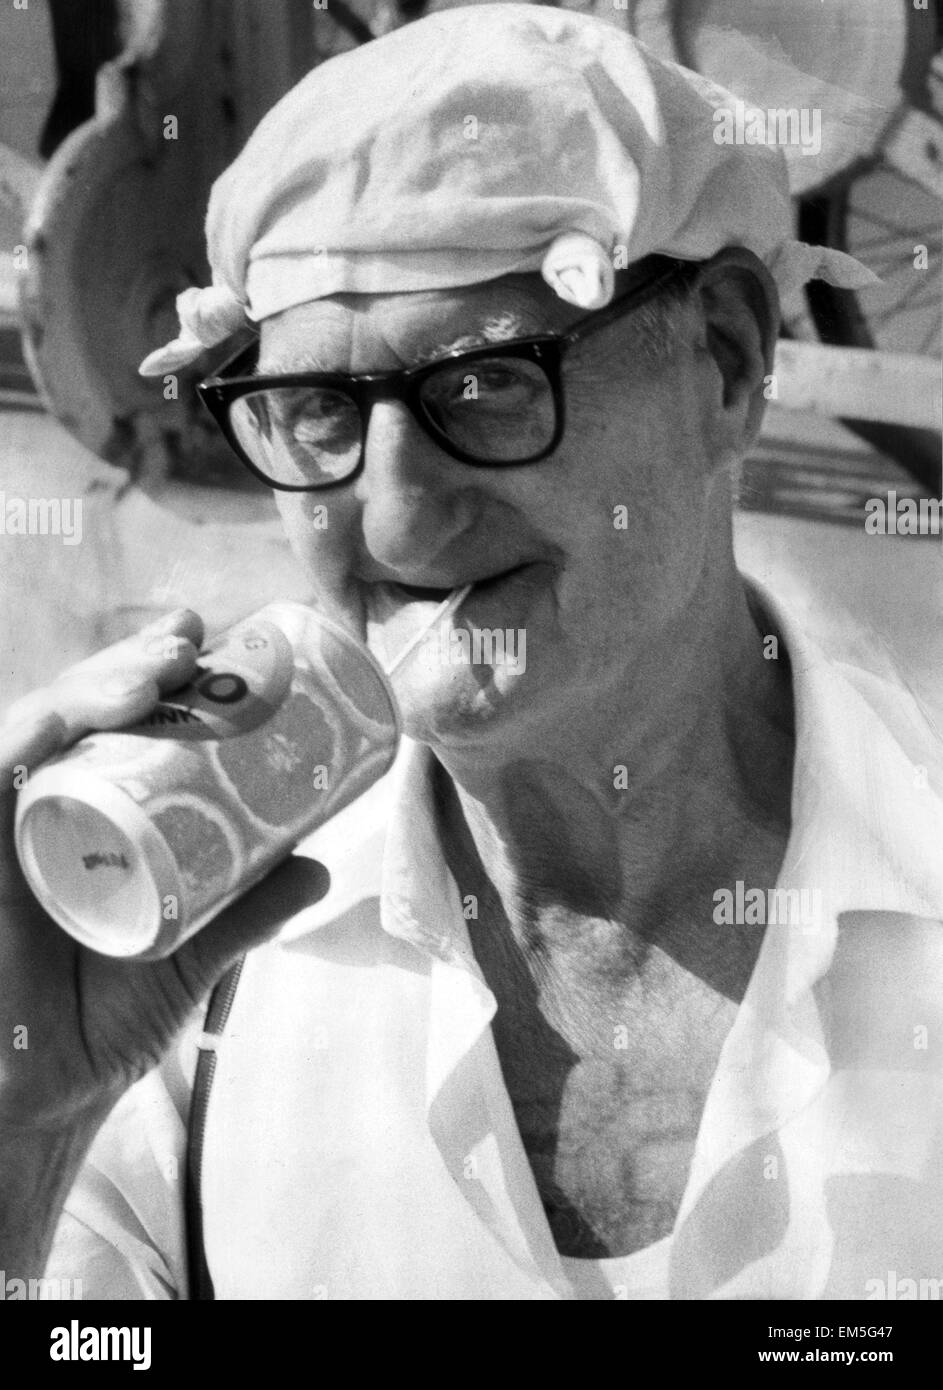 1980s beach man Black and White Stock Photos & Images - Alamy